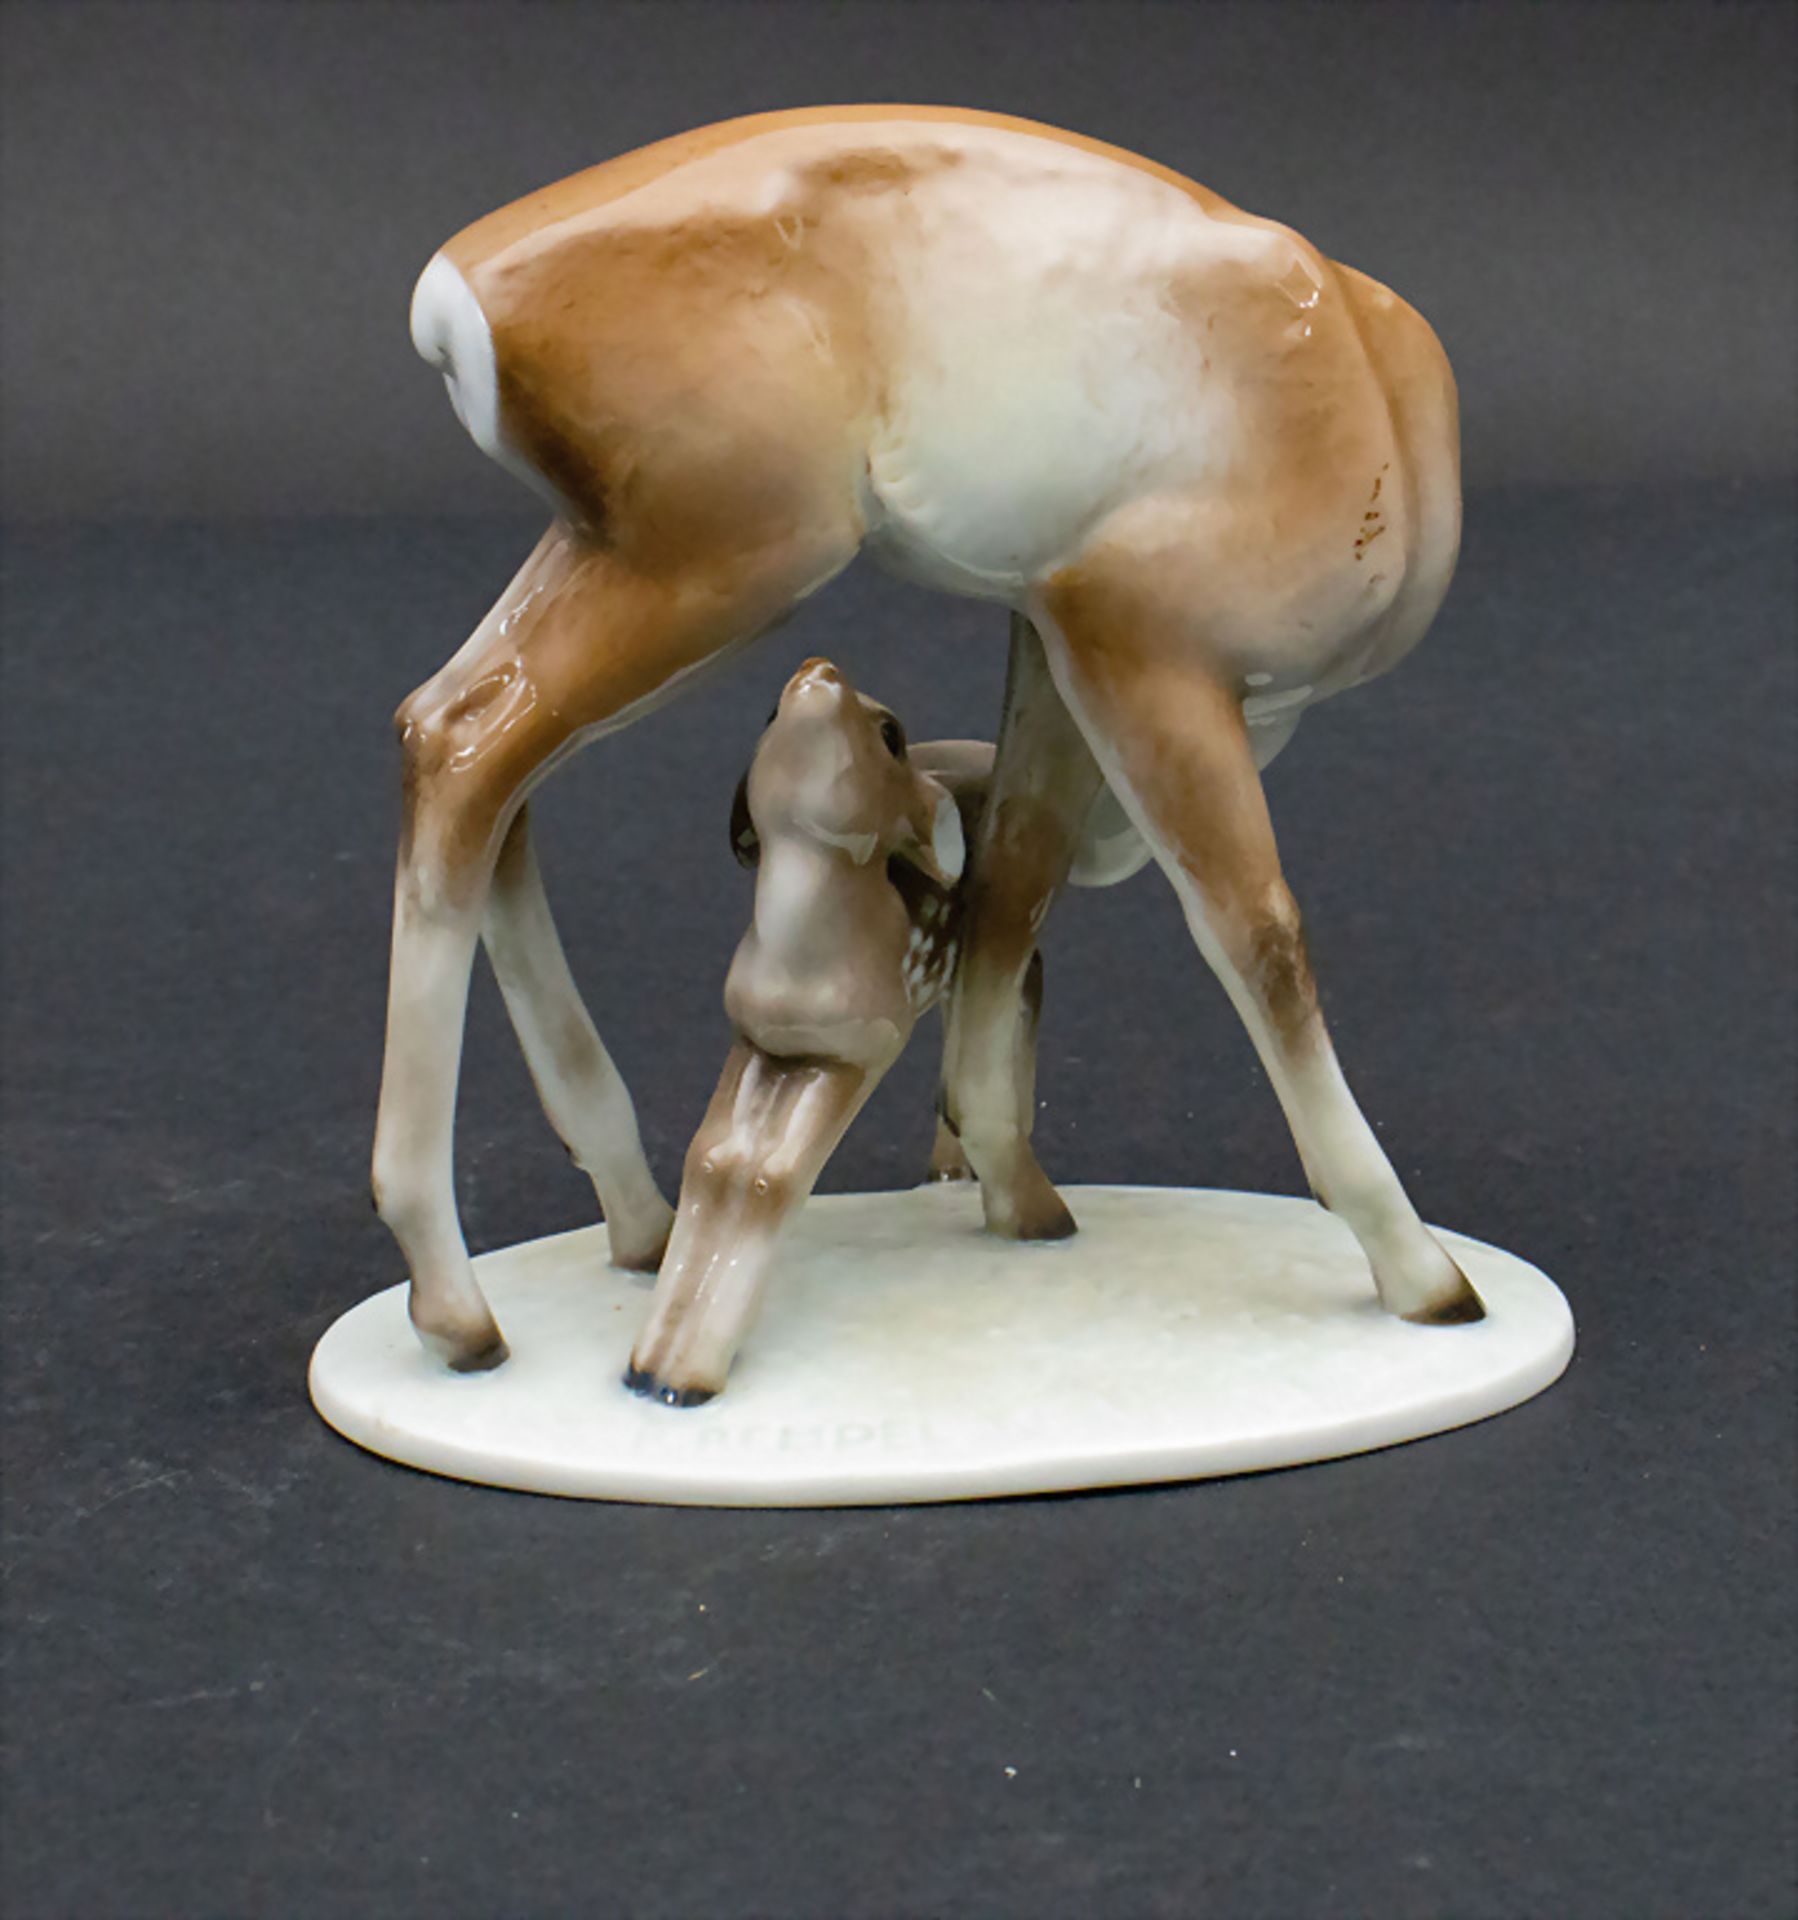 Reh mit Rehkitz / A deer with a fawn, Rudolf Rempel, Rosenthal, Selb, um 1937 - Image 5 of 7